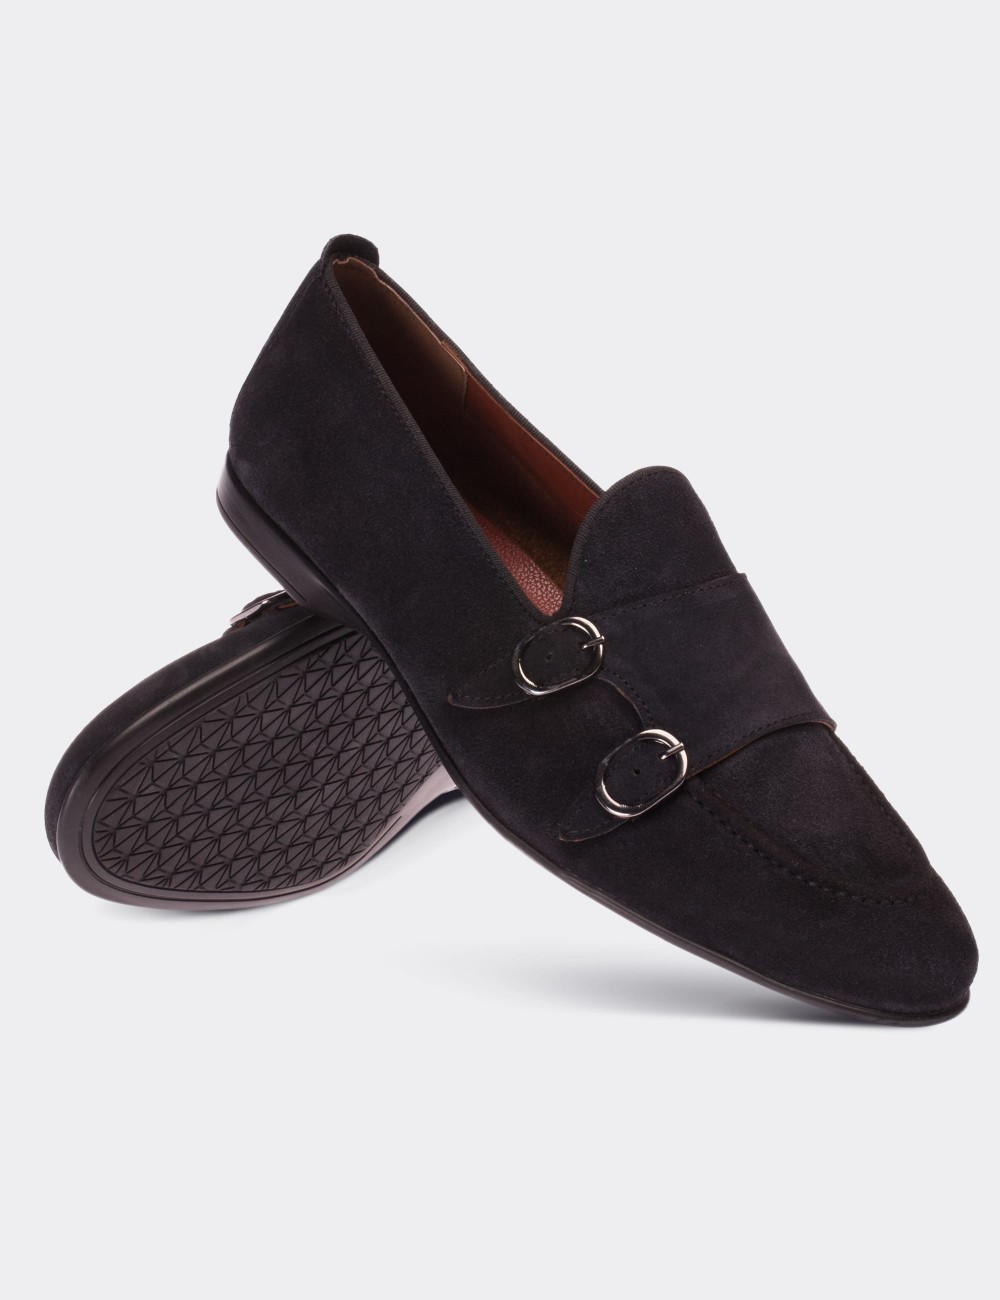 Navy Suede Leather Loafers - 01704MLCVC01